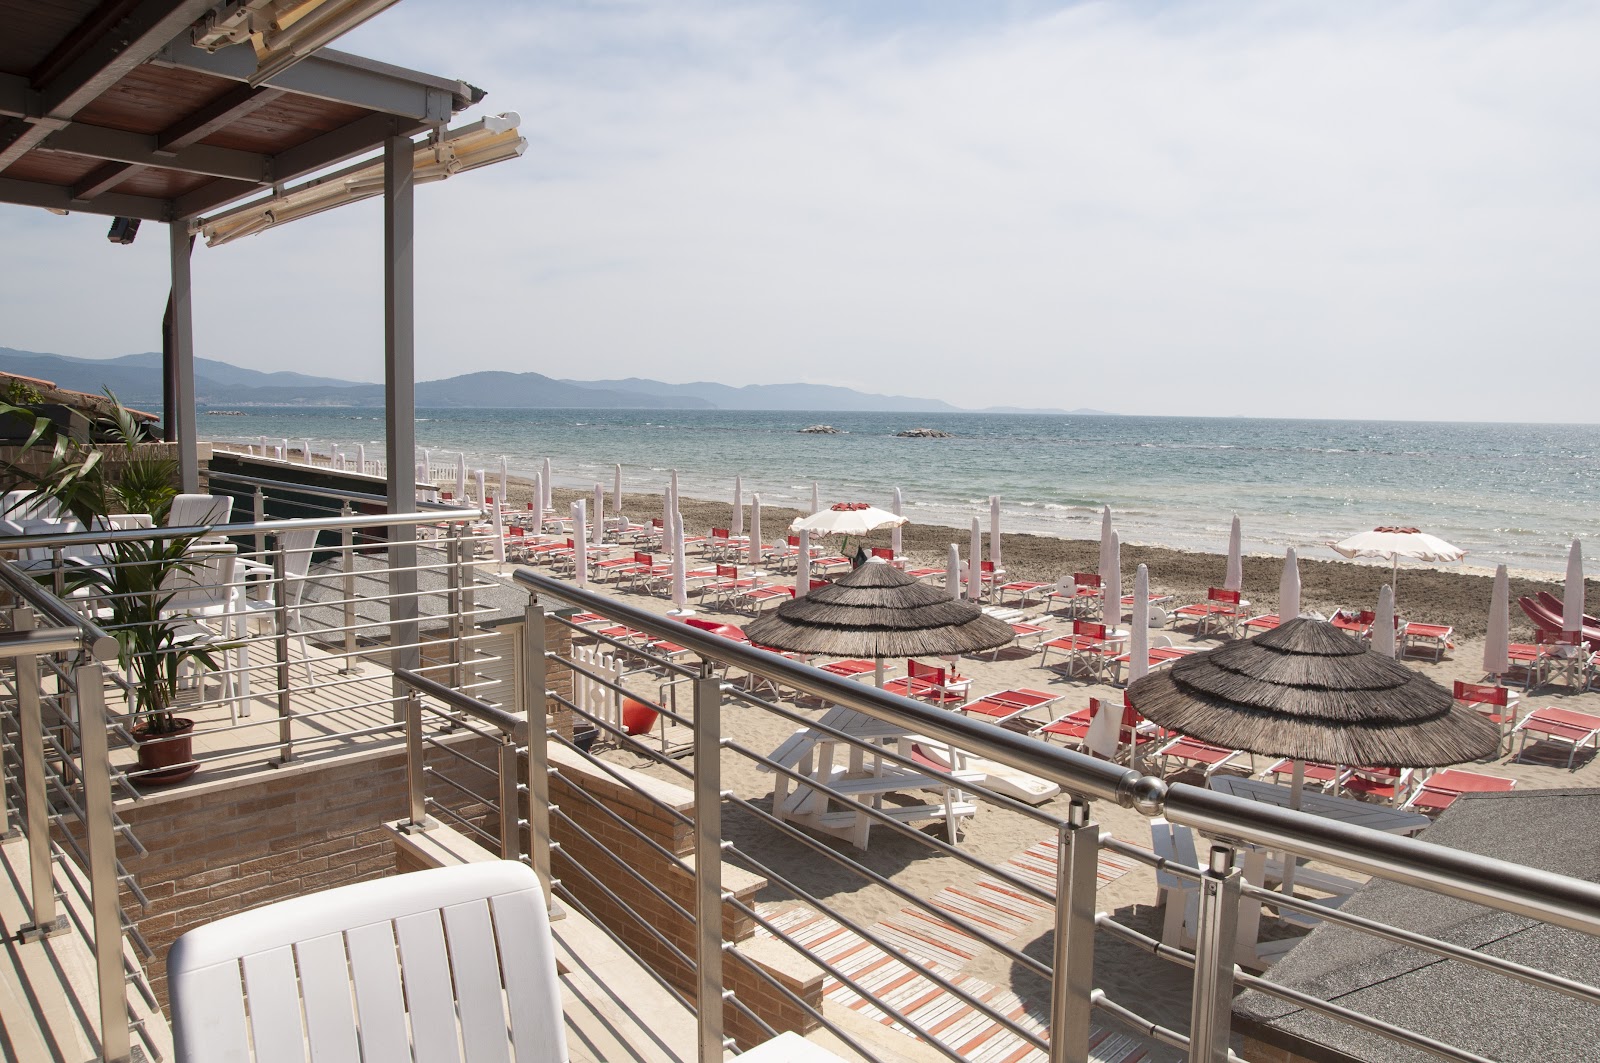 Photo of Ultima Spiaggia - recommended for family travellers with kids